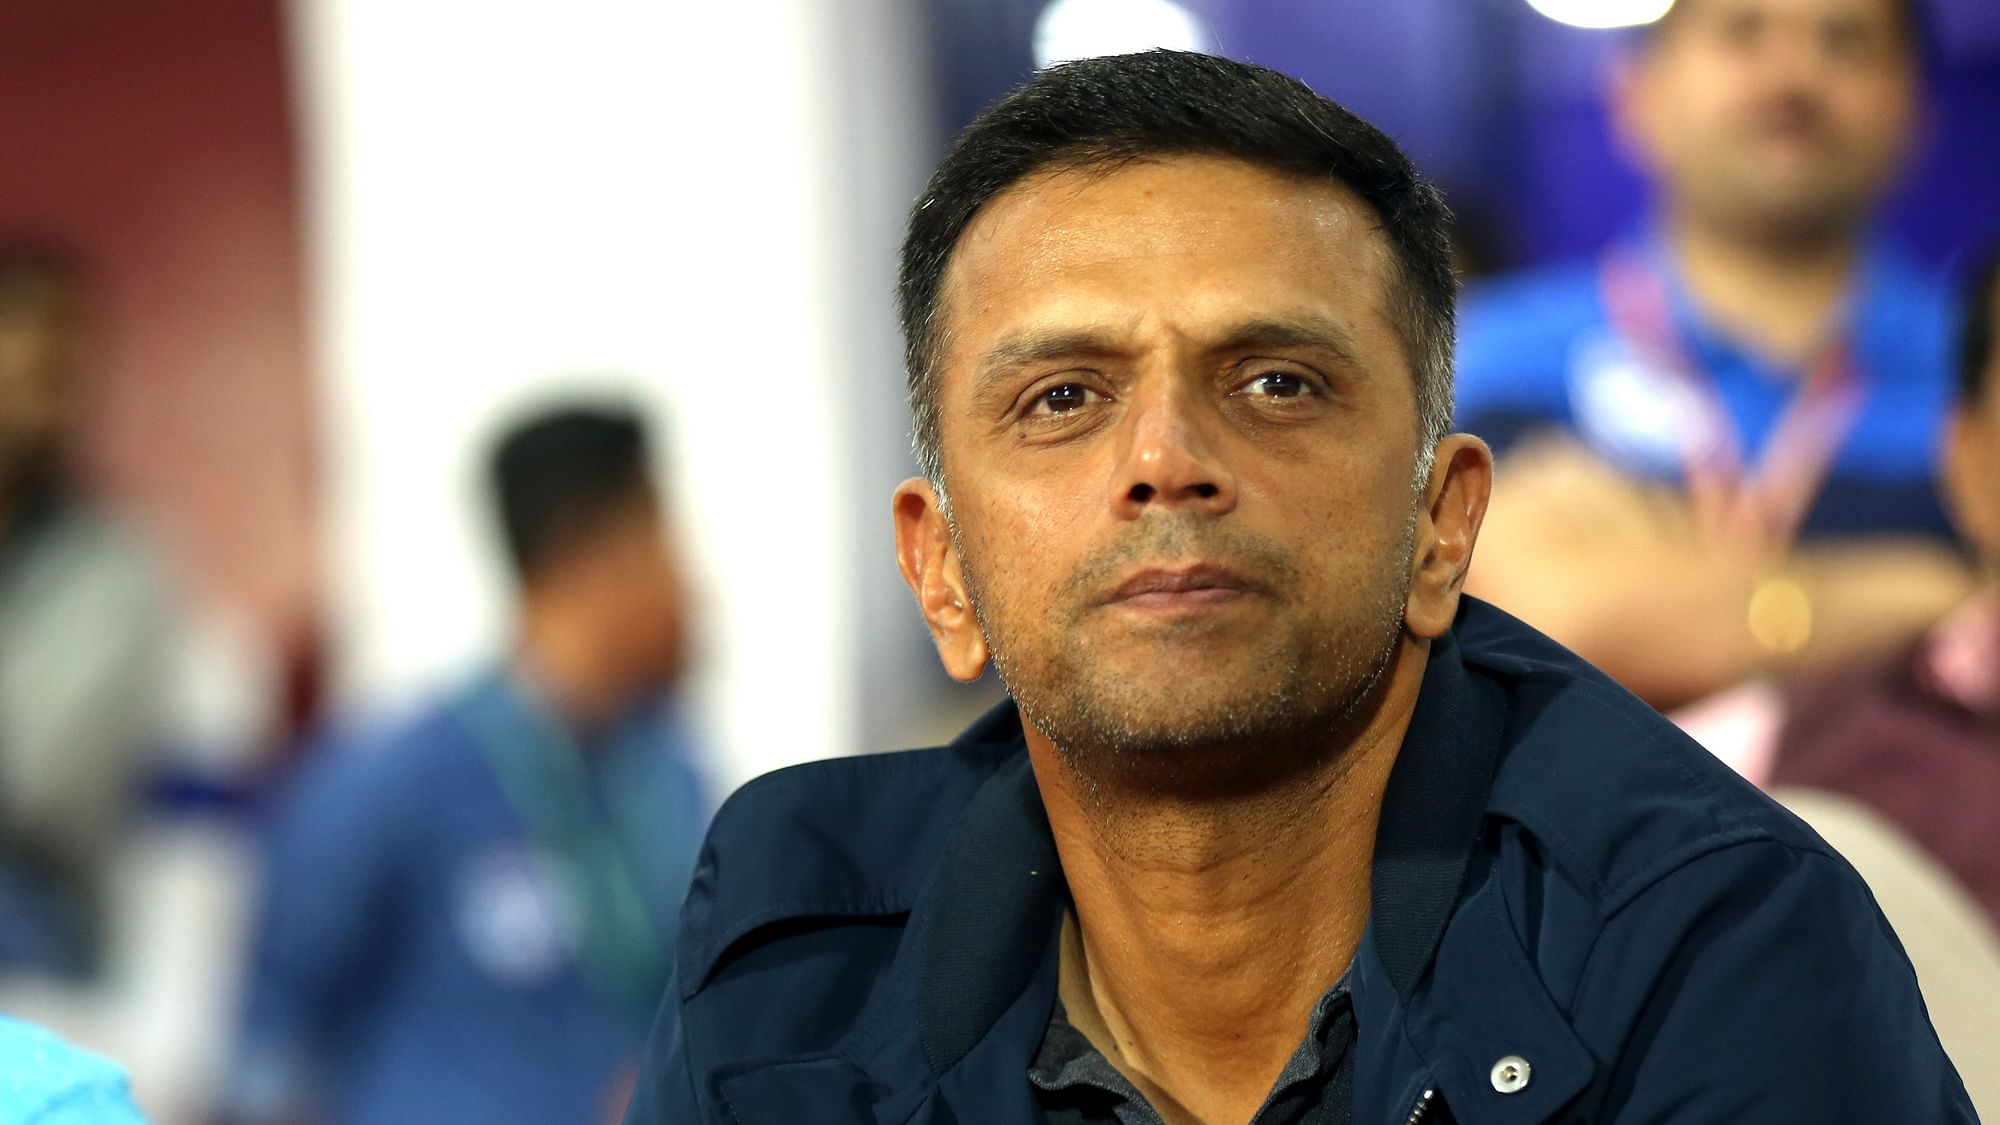 The BCCI has decided to release all the 11 National Cricket Academy (NCA) coaches – picked by chief Rahul Dravid.